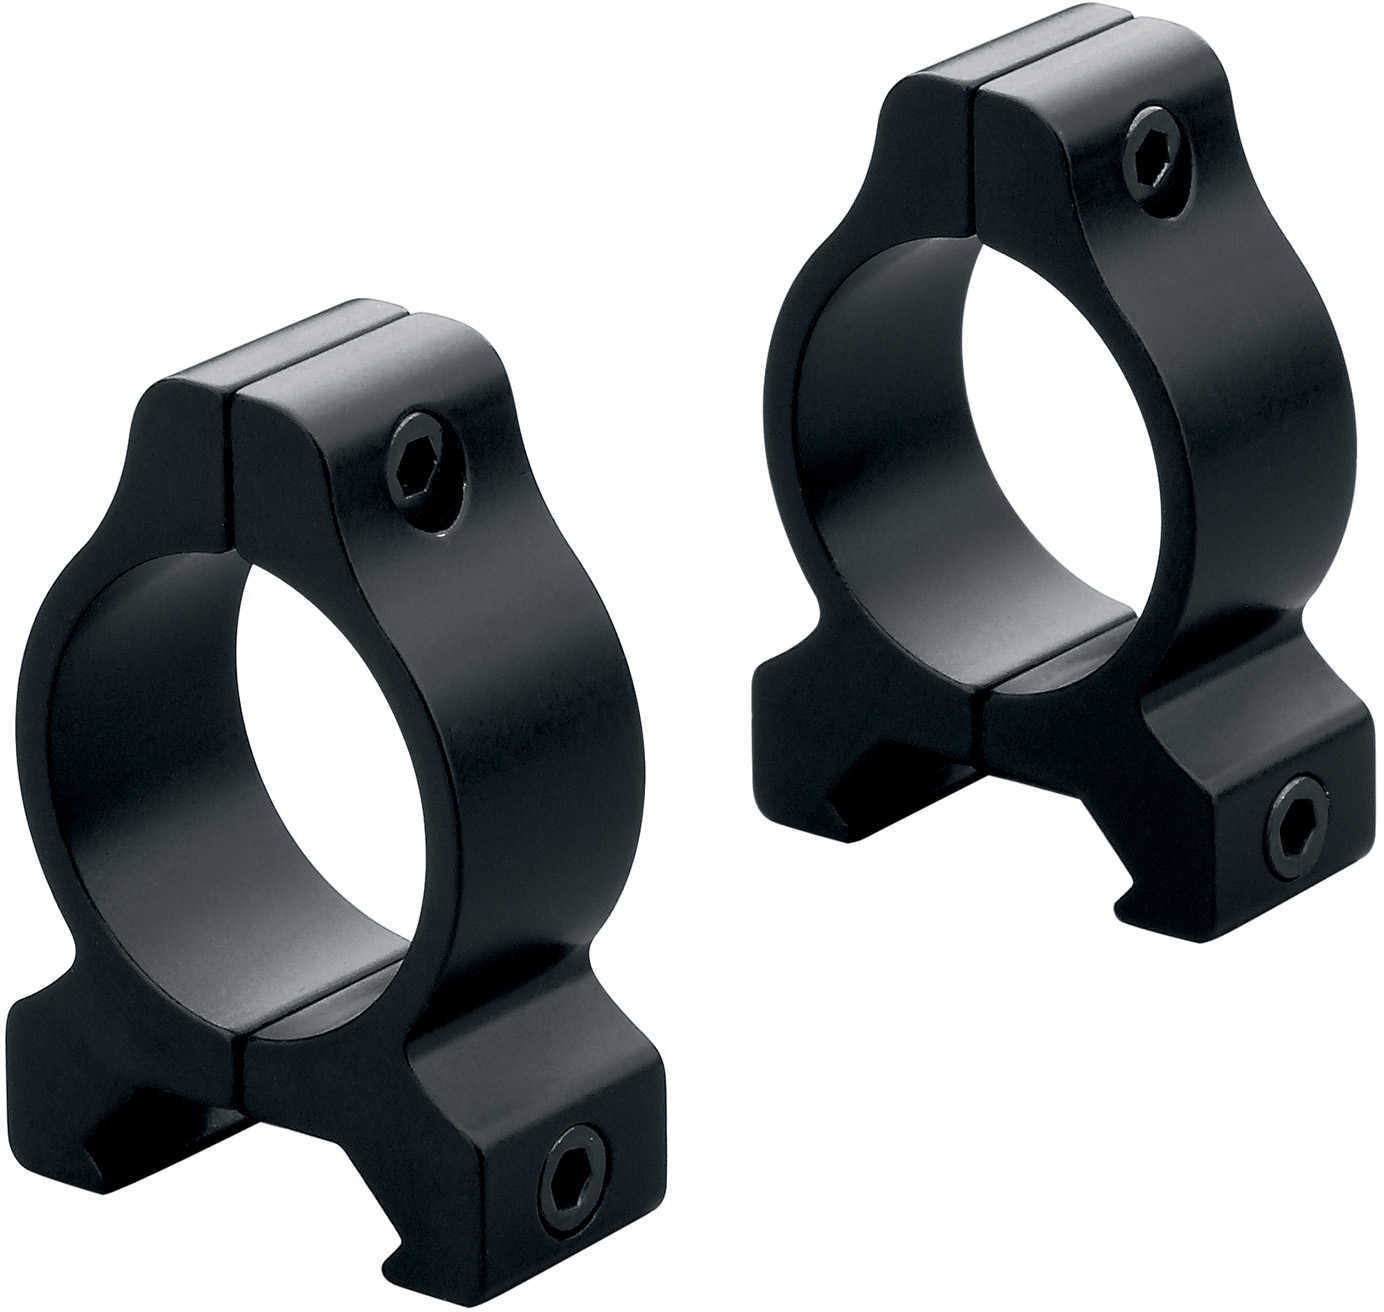 Leupold Rifleman Aluminum 1" .22 Rimfire Rings 3/8" - Matte Finish Extremely Affordable And exceptionally Well-Made - Pr